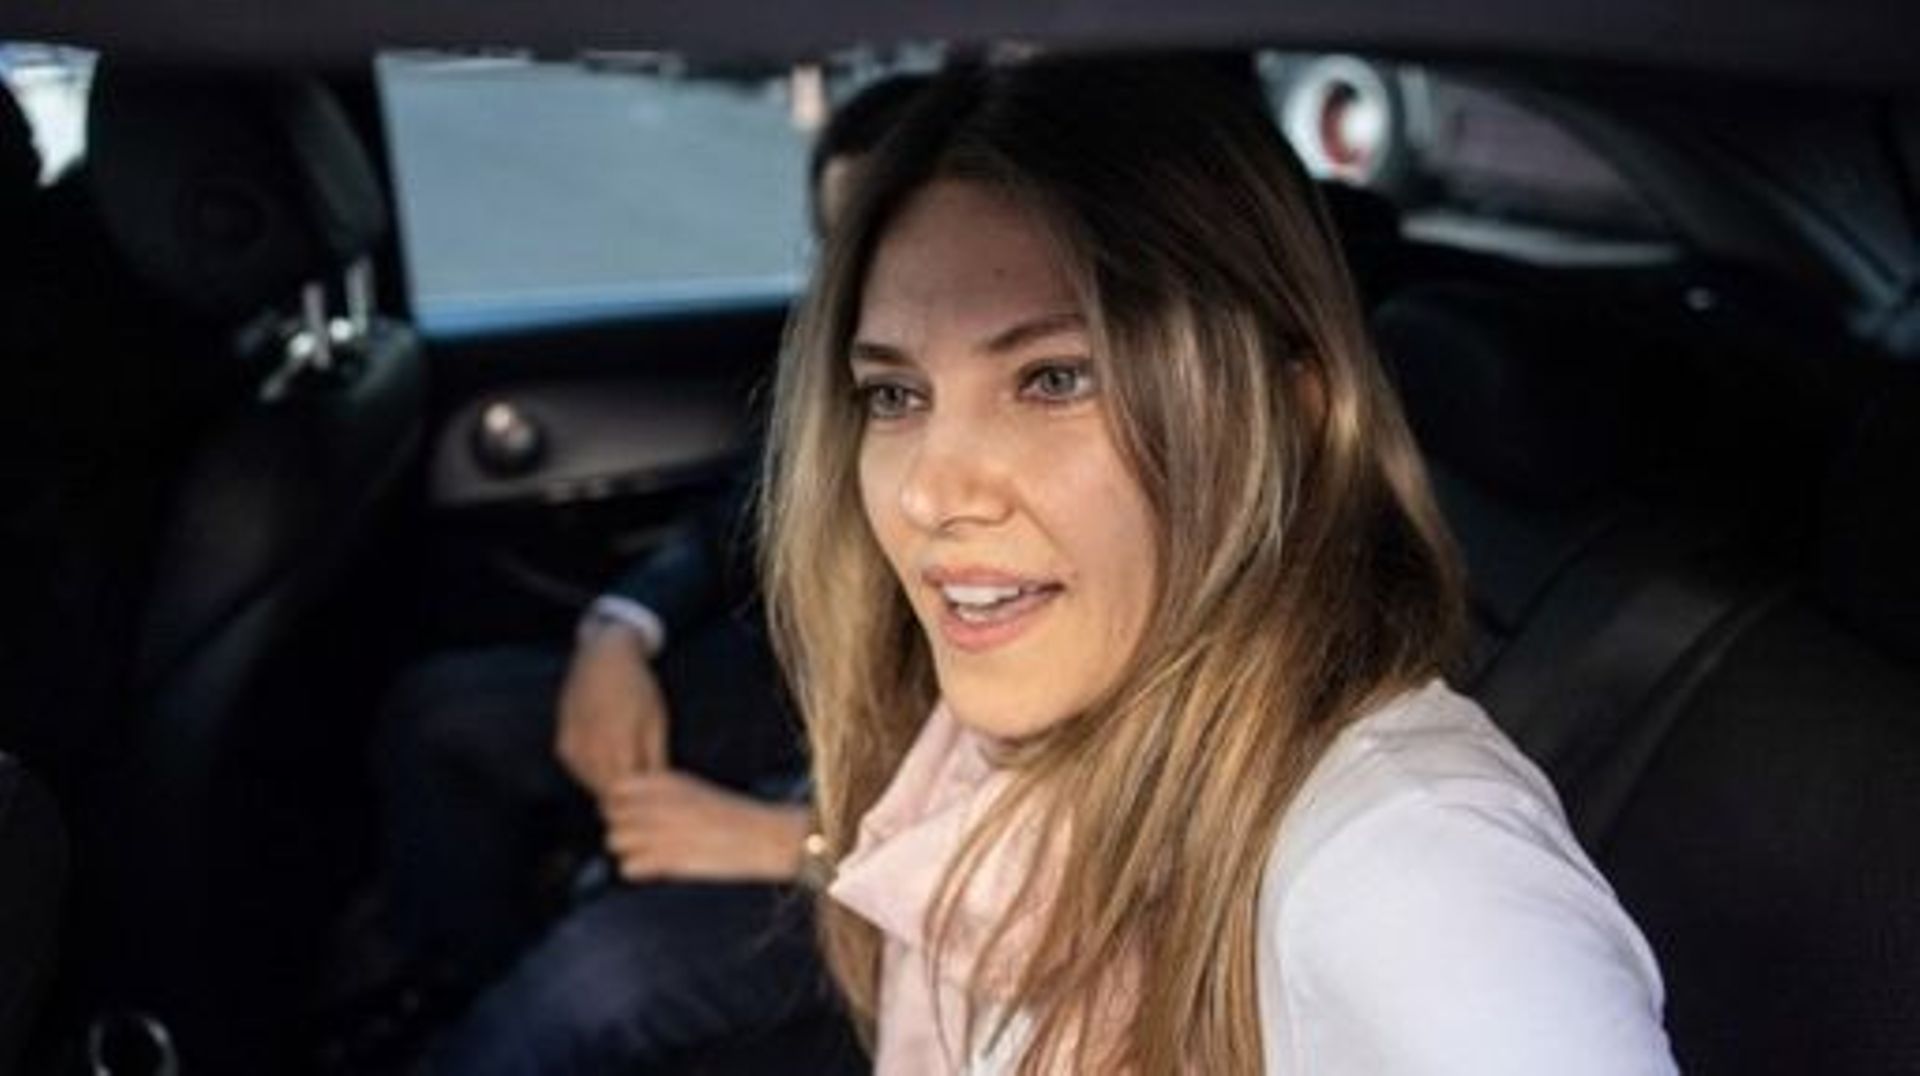 Greek MEP Eva Kaili smiles in the back of a vehicle arrives at her home in Brussels upon her release from Haren prison, in Brussels on April 14, 2023. Greek MEP, Eva Kaili, who is the last suspect detained in a Belgian probe into alleged bribery by Qatar 